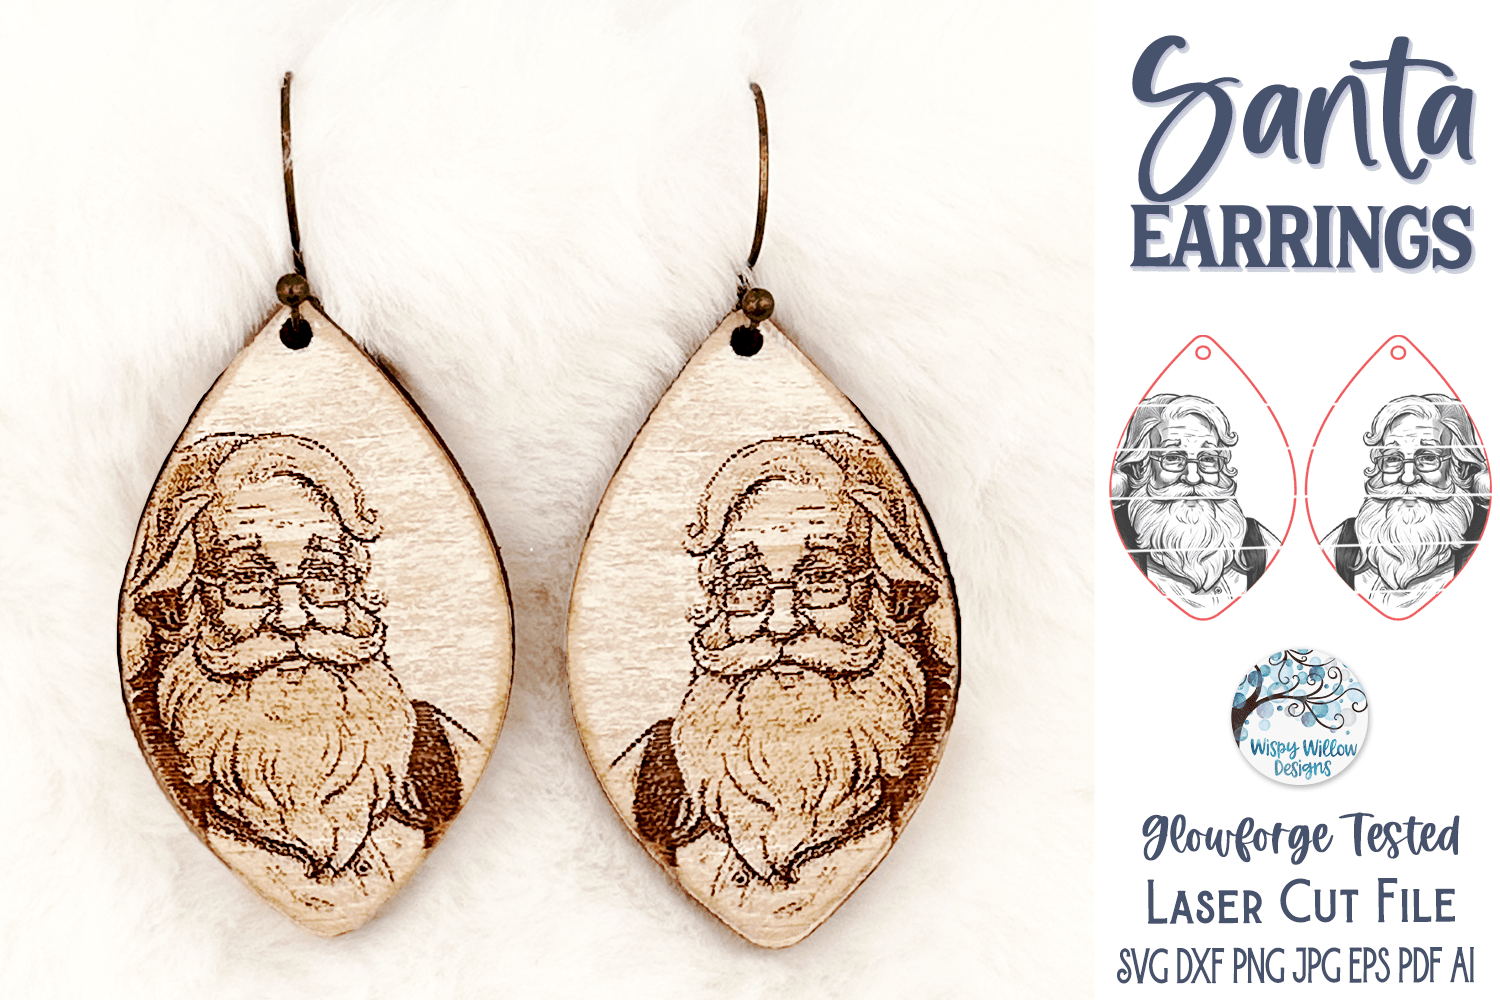 Santa Claus Earring SVG File for Glowforge Laser Wispy Willow Designs Company